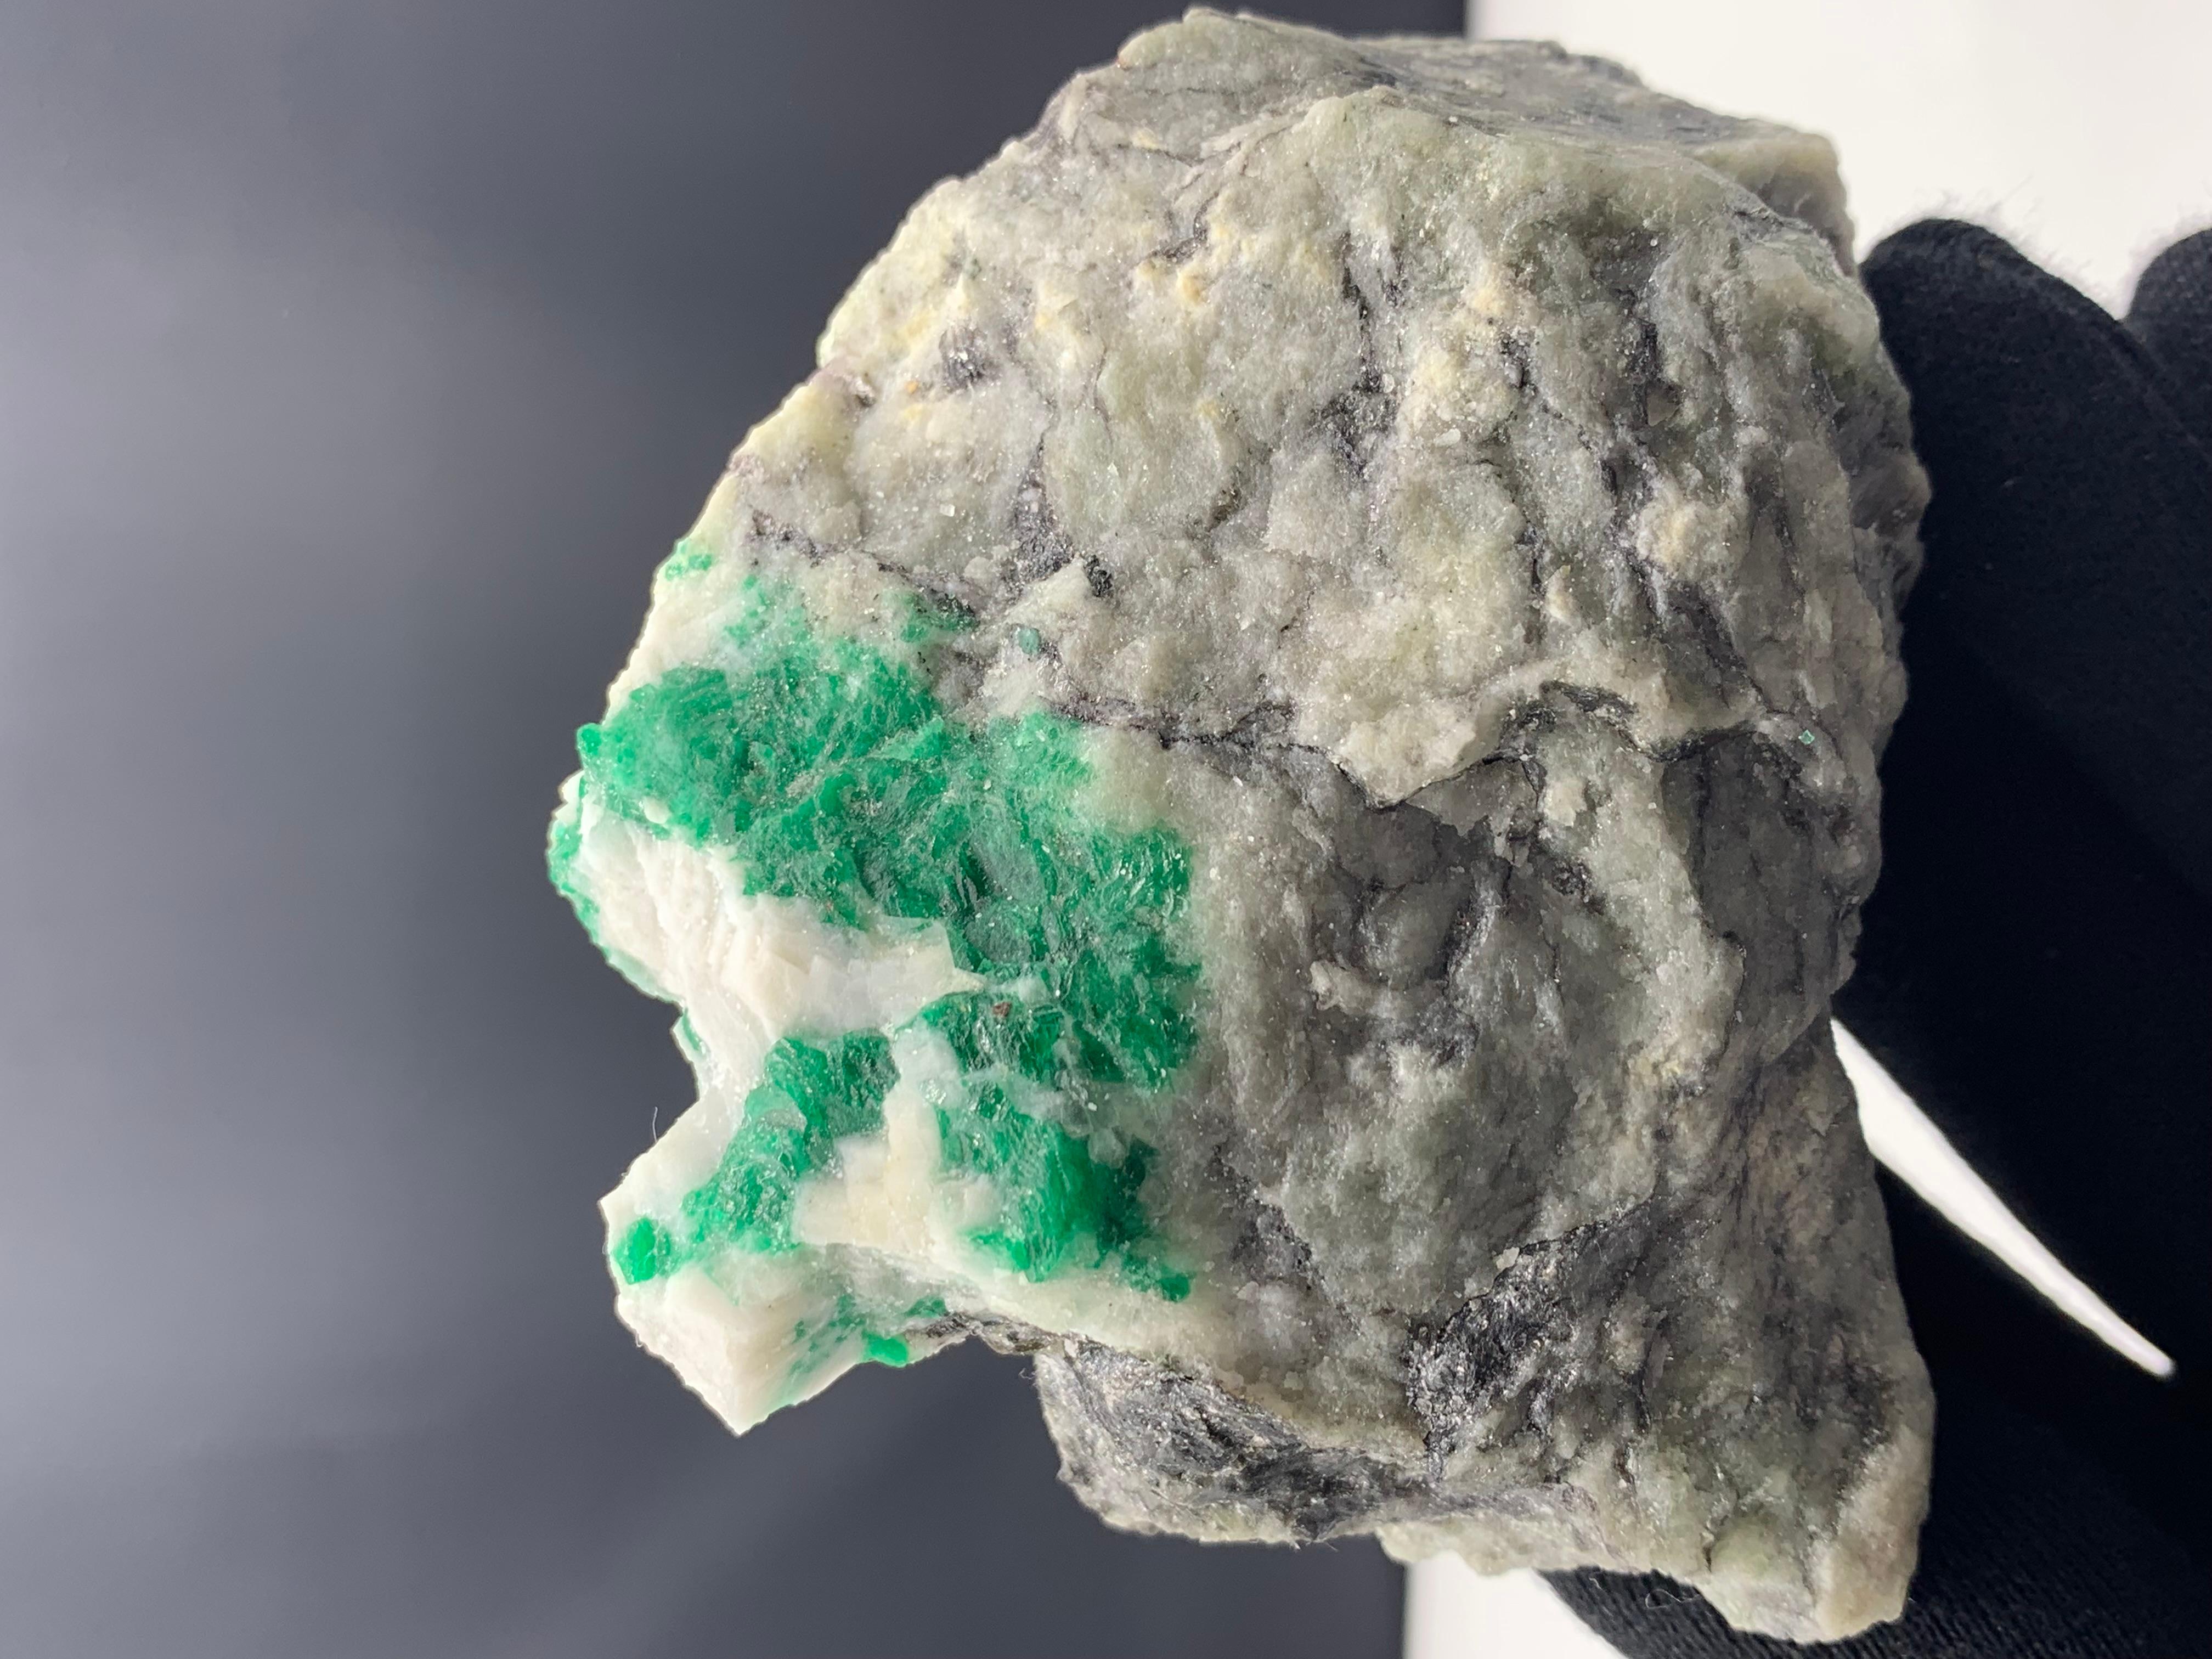 346.56 Gram Beautiful Emerald Specimen From Swat Valley, Pakistan 

Weight: 346.56 Gram
Dimension: 8.6 x 8.5 x 3.7 Cm
Origin: Swat Valley, Pakistan 

Emerald has the chemical composition Be3Al2(SiO3)6 and is classified as a cyclosilicate. It has a